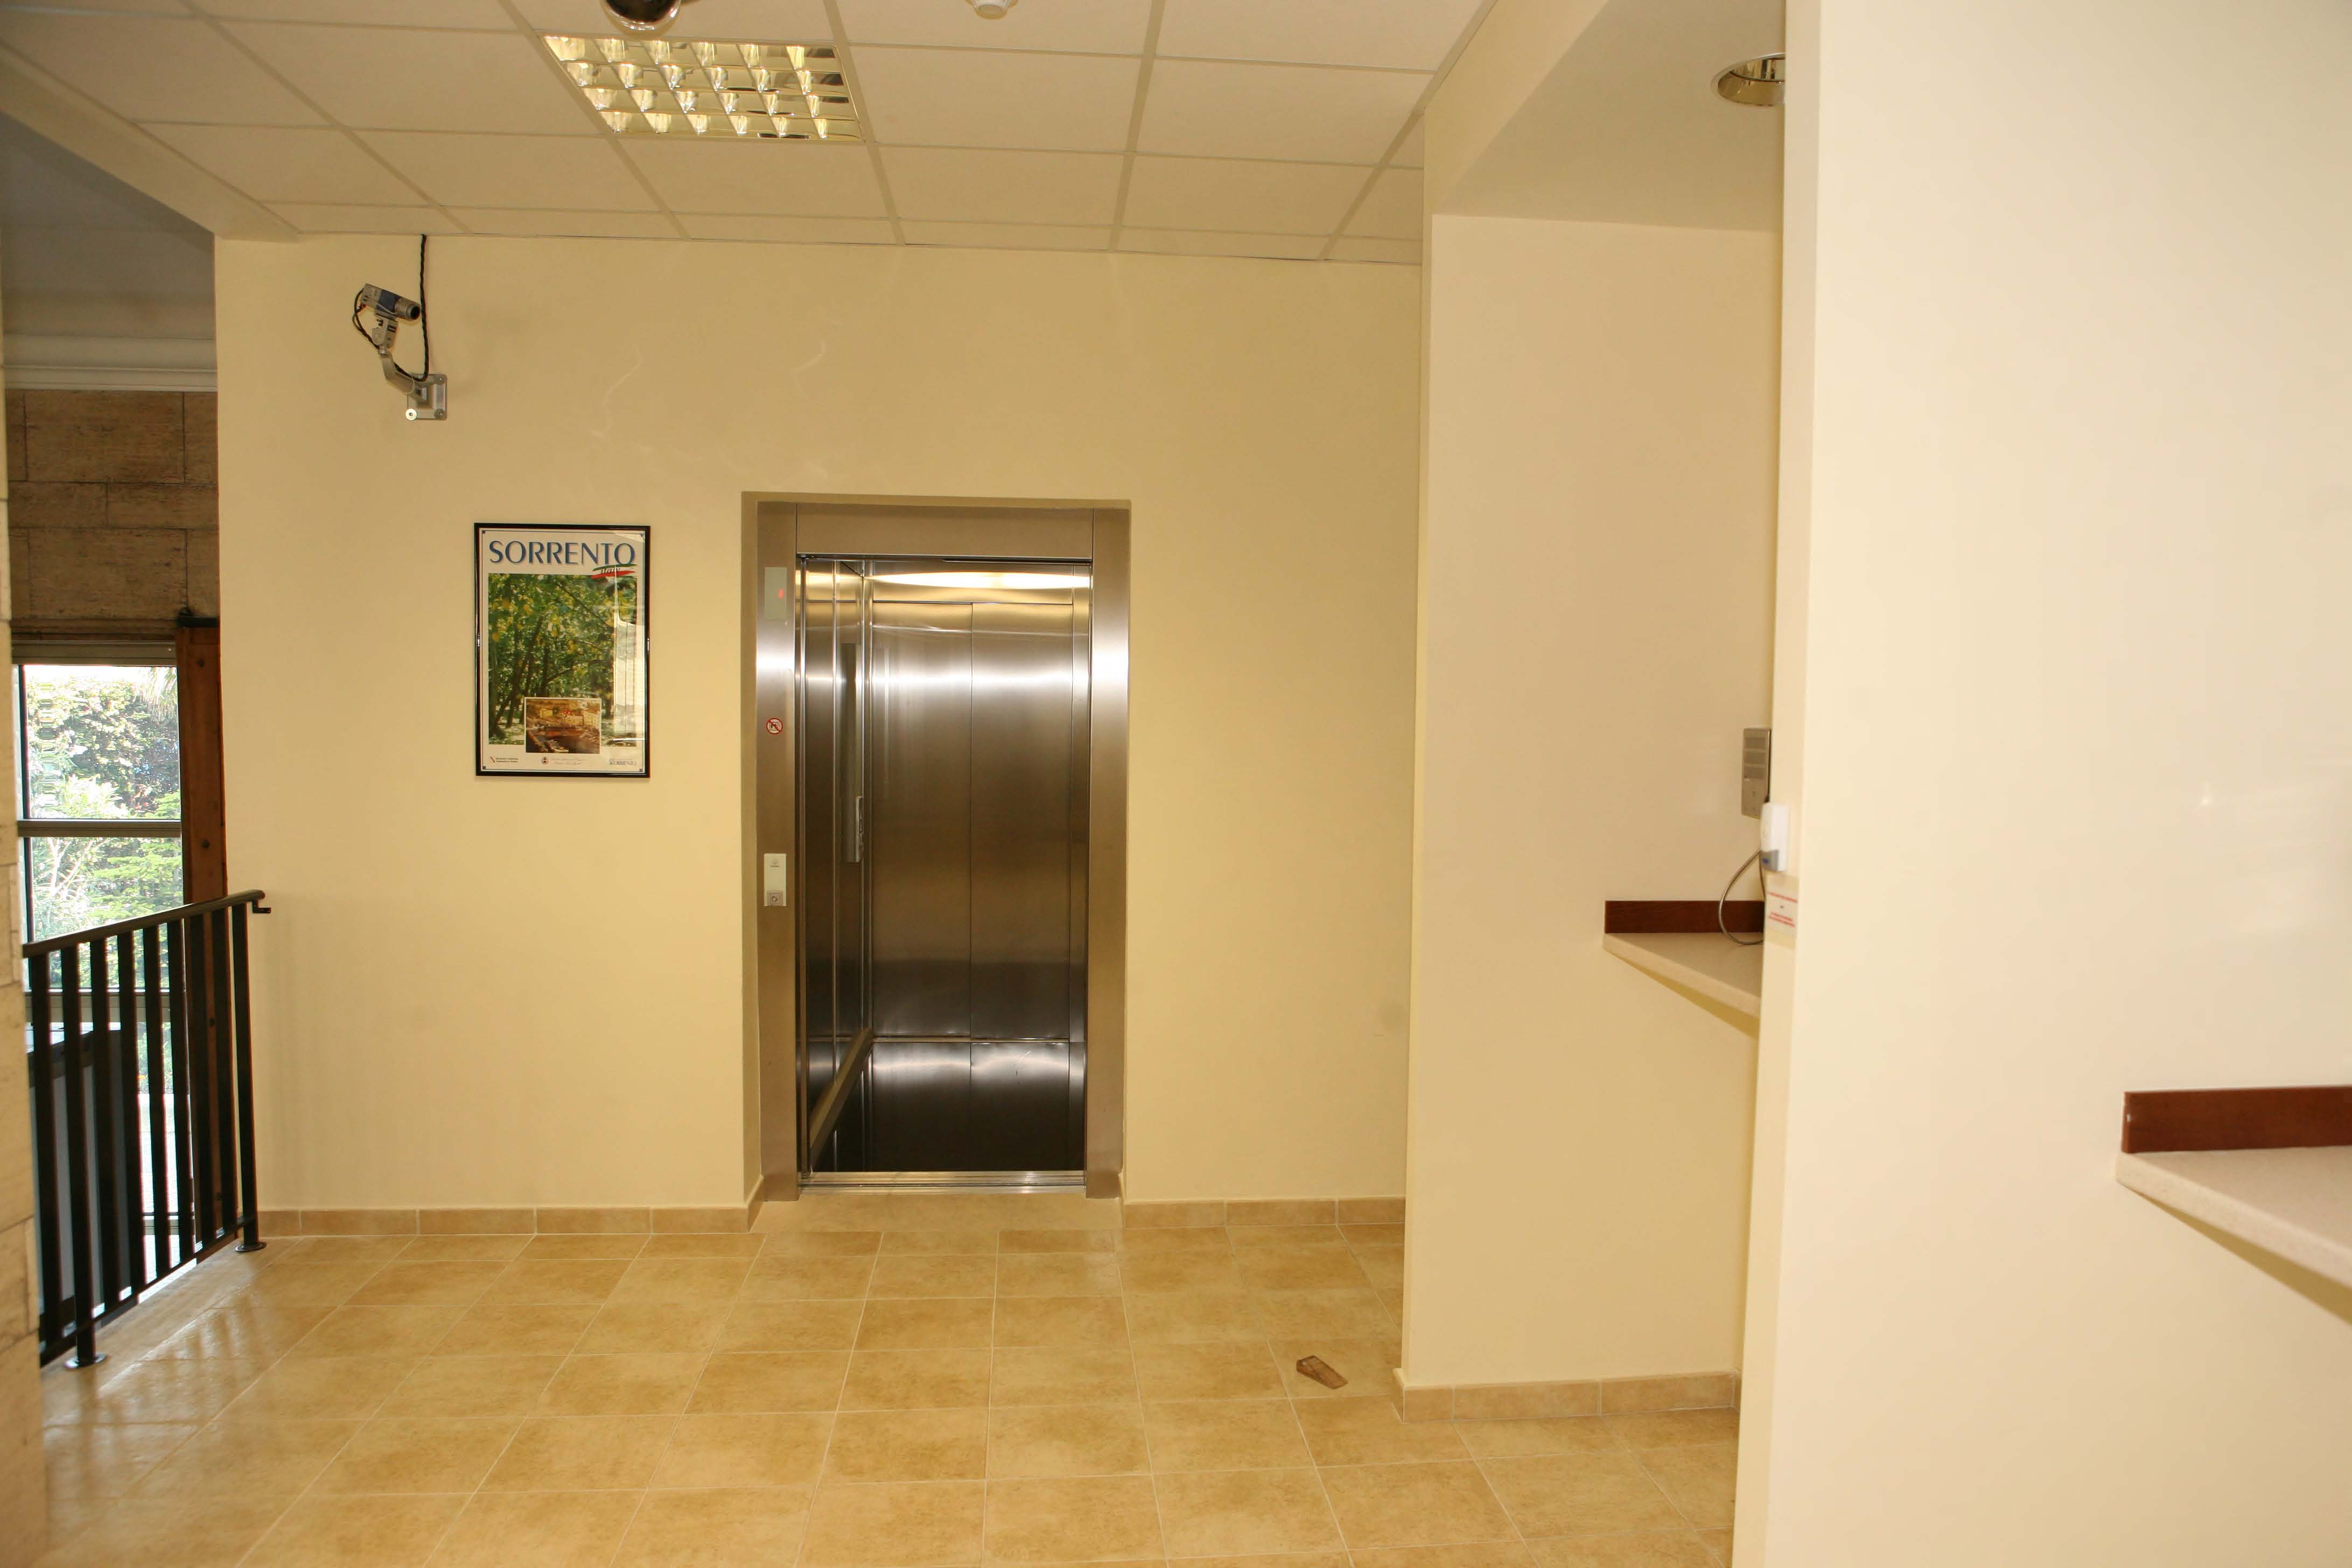 Accessible Route - Elevator